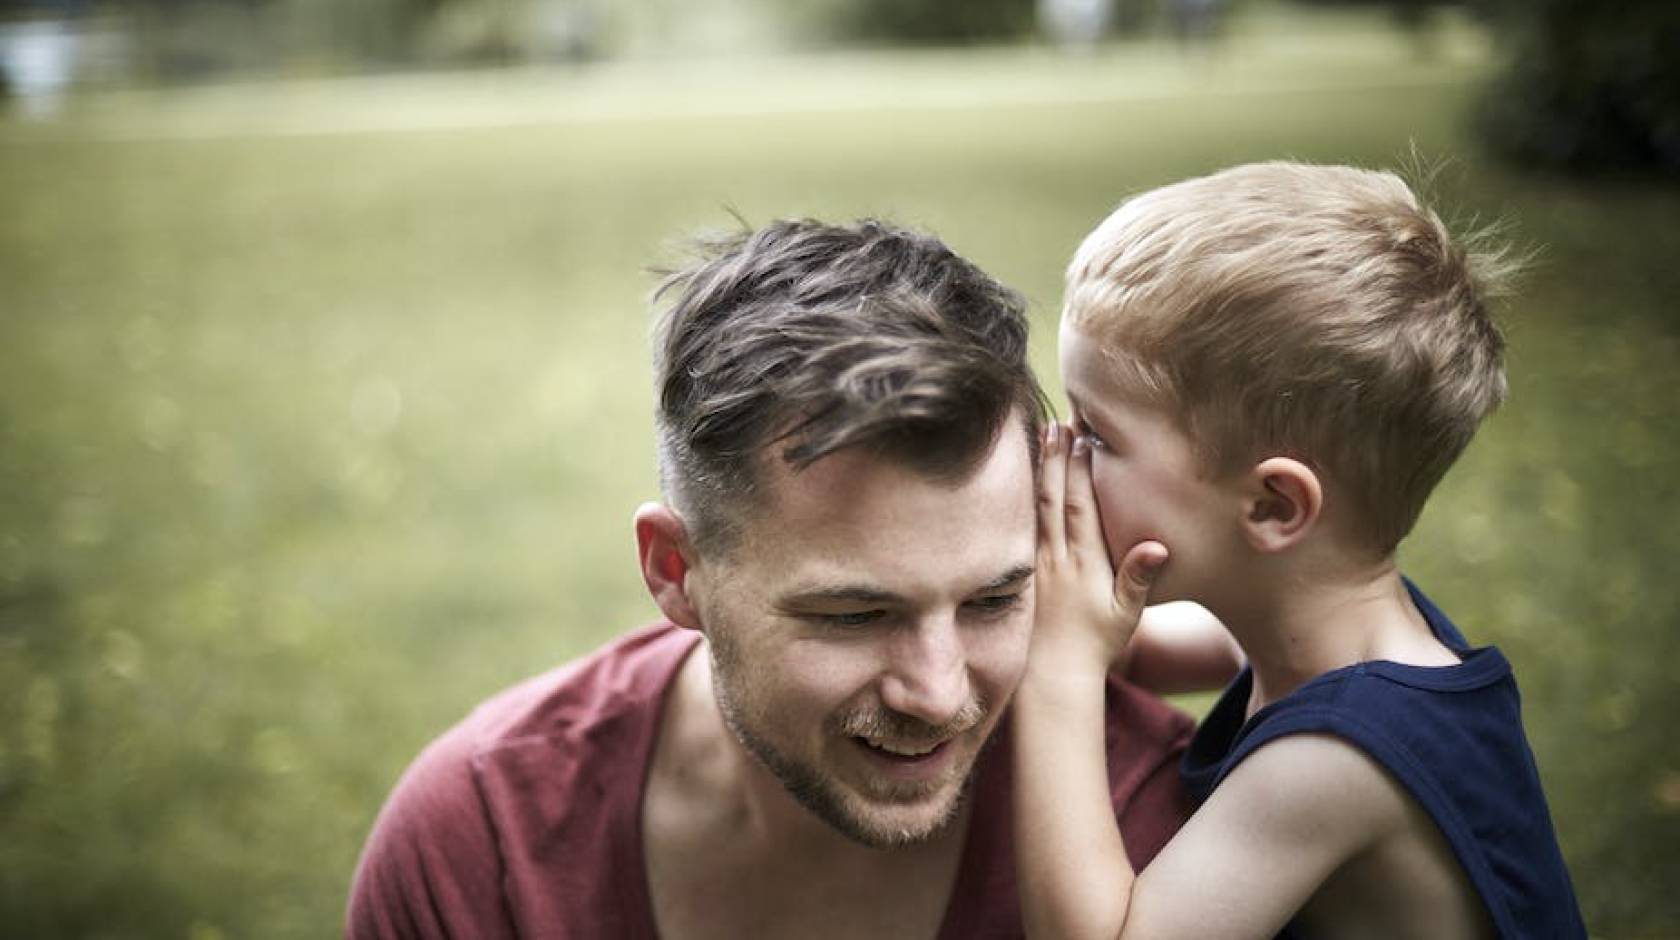 Child whispering in father's ear